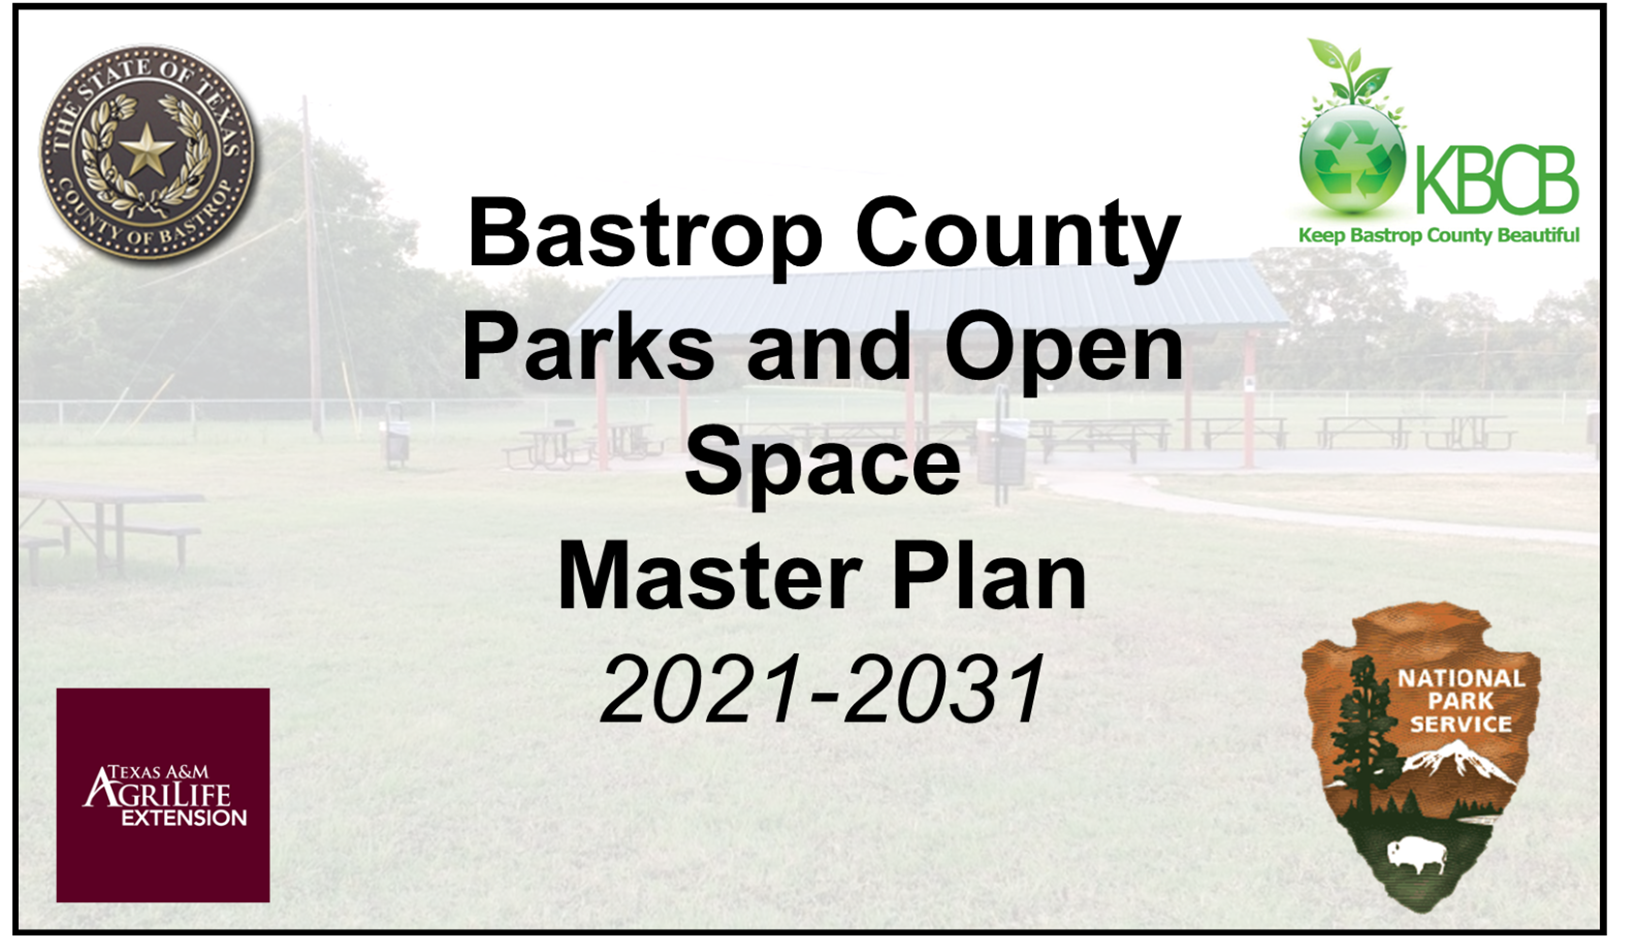 Parks and Open Space Master Plan